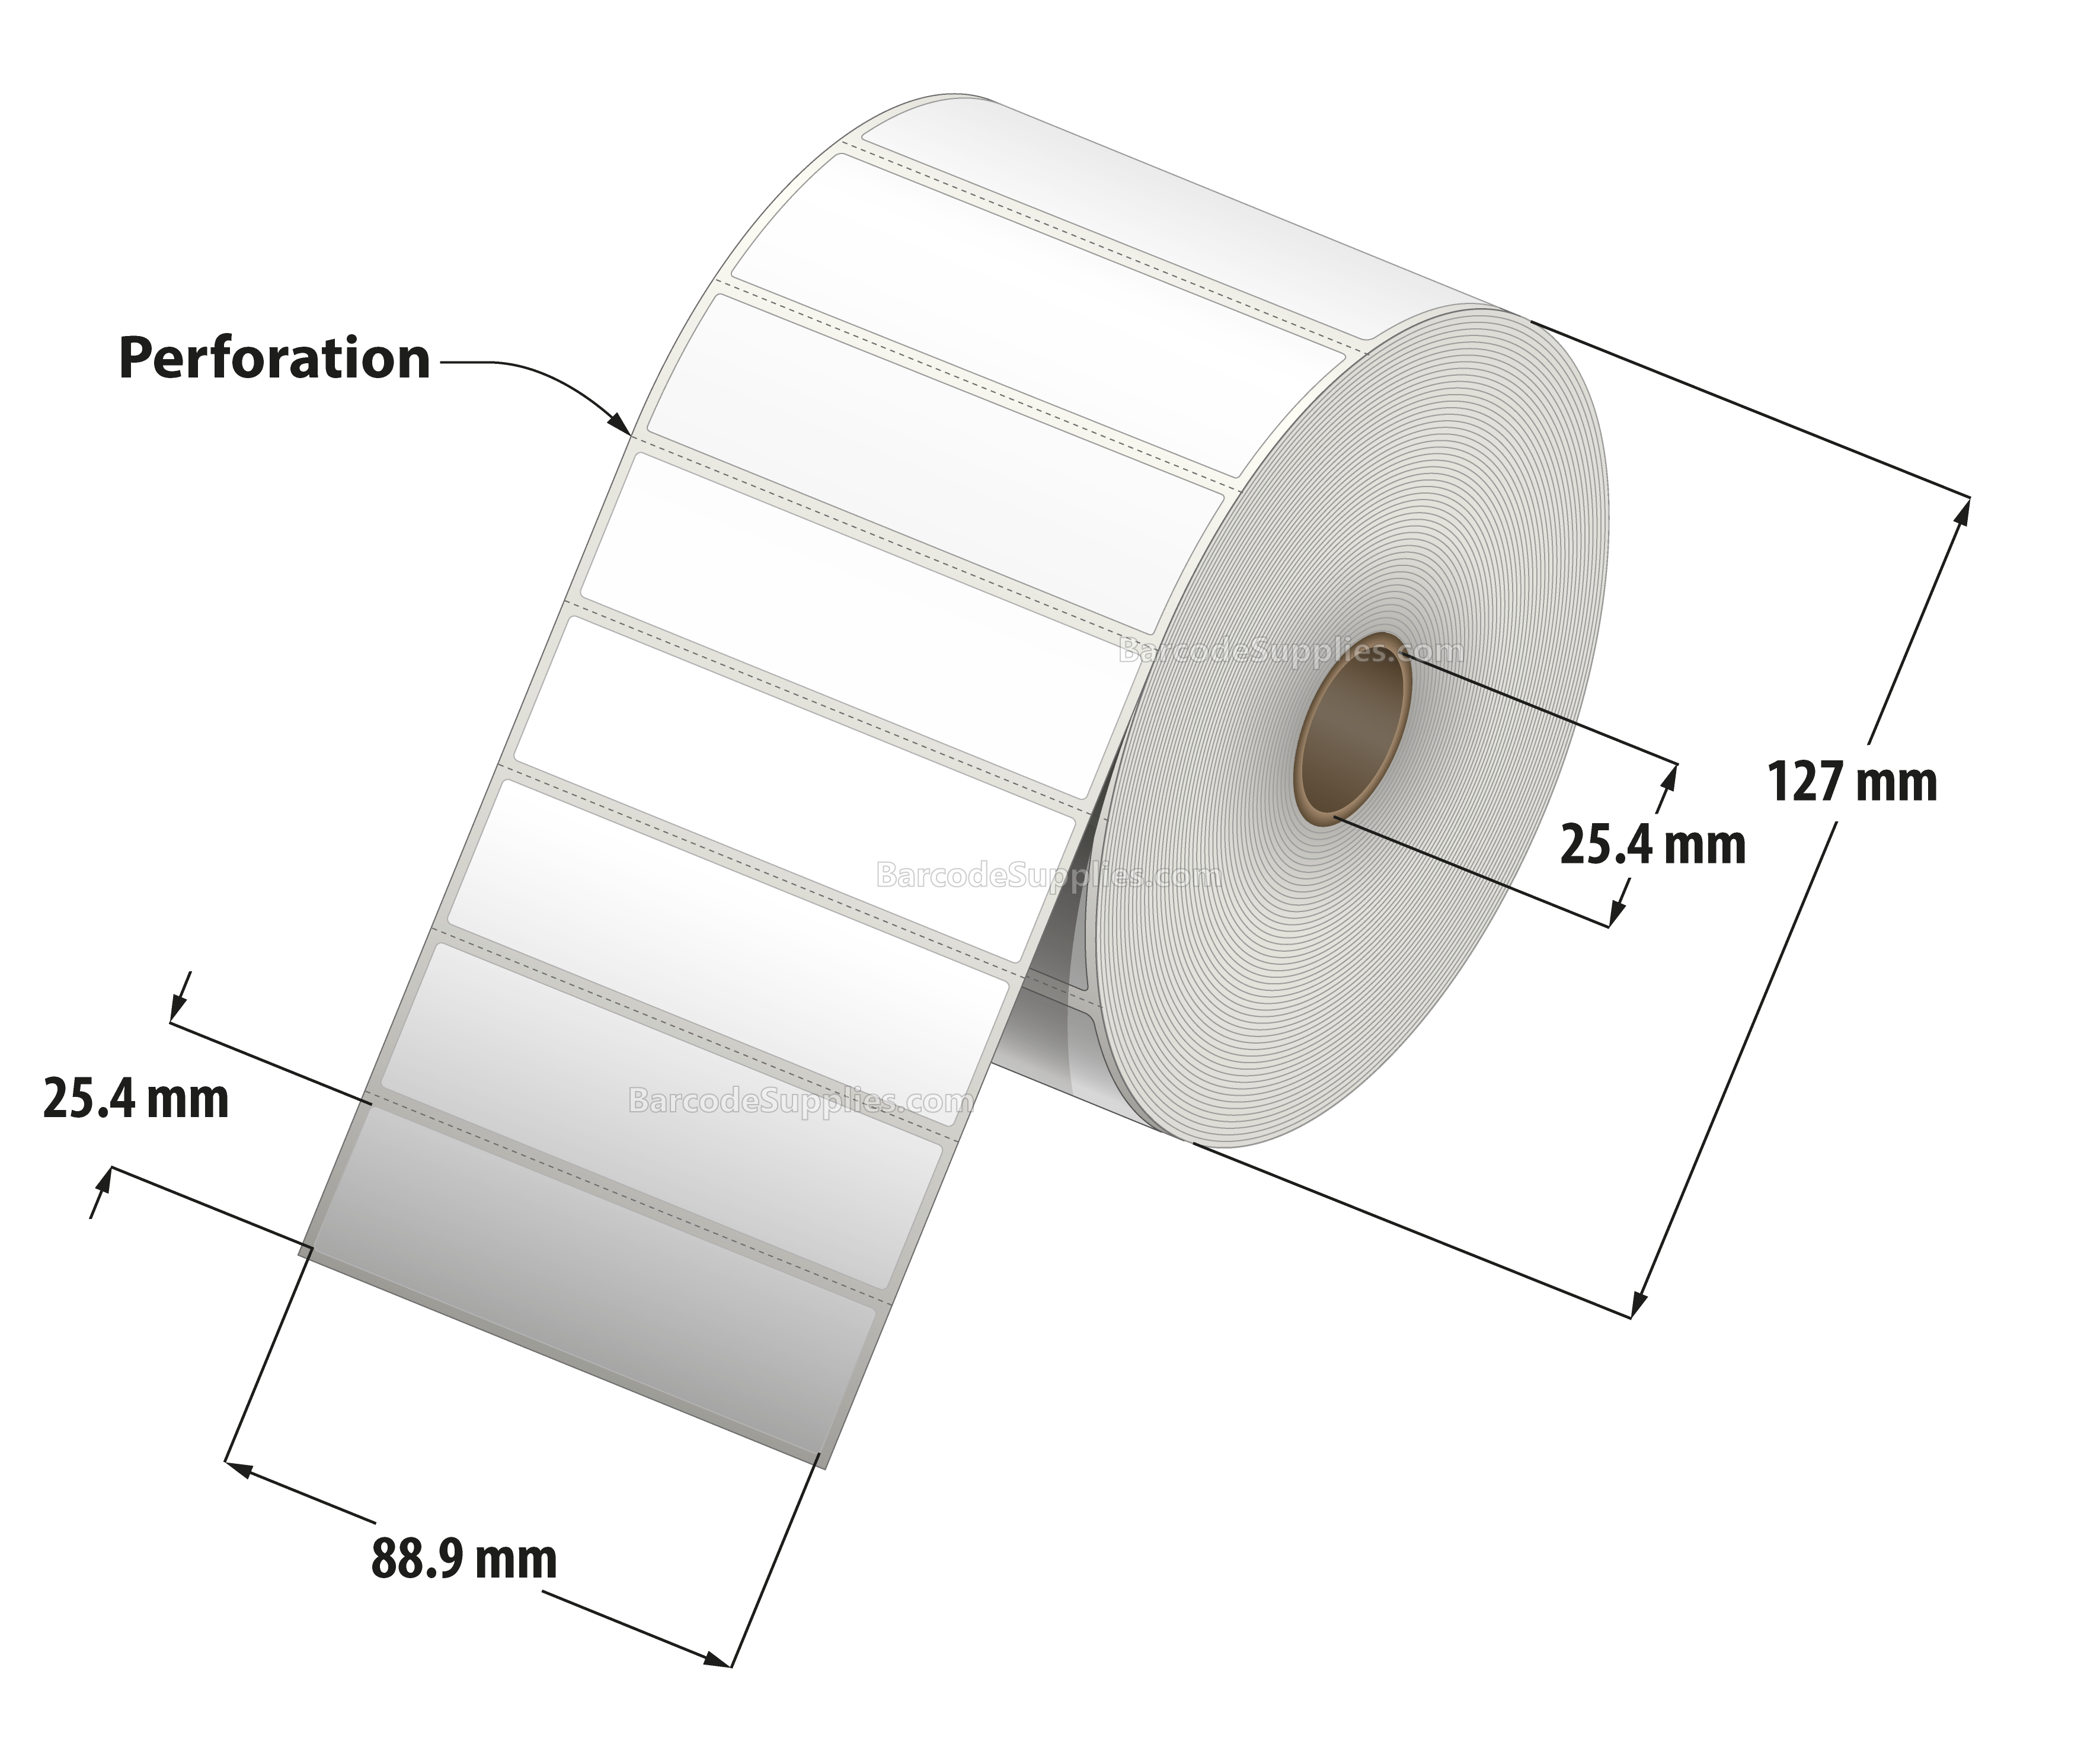 3.5 x 1 Thermal Transfer White Labels With Permanent Adhesive - Perforated - 2500 Labels Per Roll - Carton Of 12 Rolls - 30000 Labels Total - MPN: RT-35-1-2500-1 - BarcodeSource, Inc.